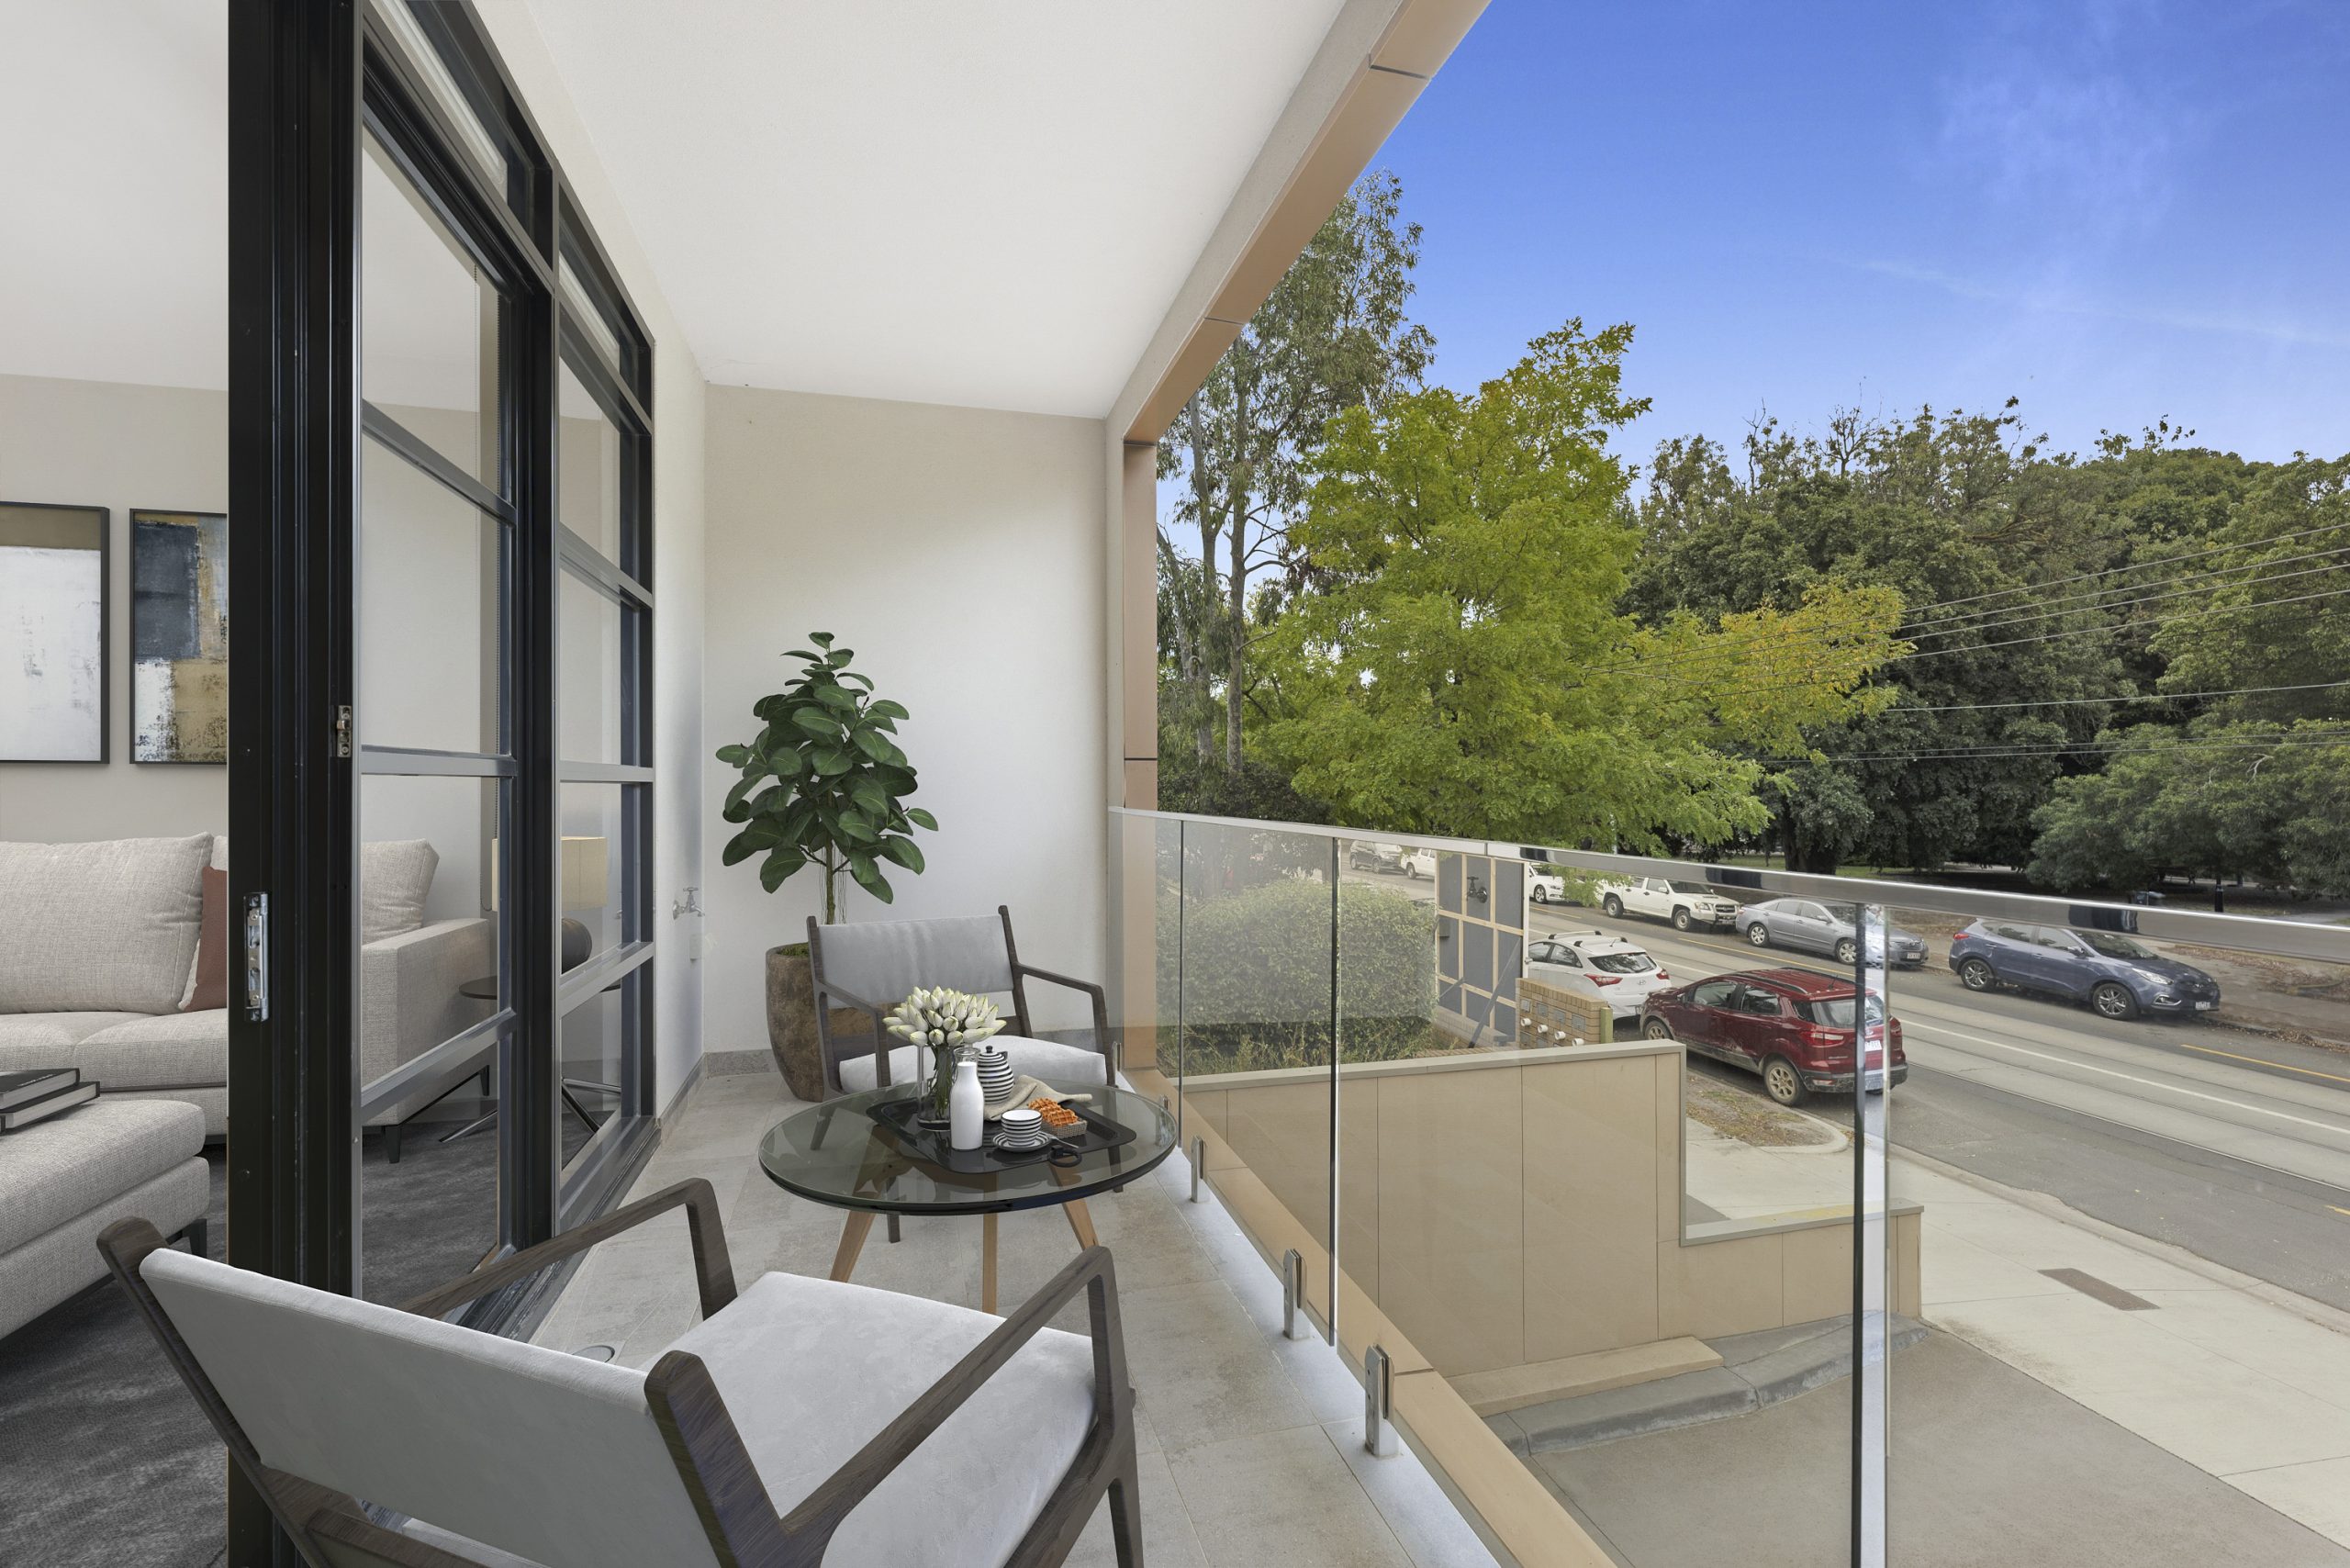 img src="realestatephotoediting.jpg" alt="a tidy and beautiful balcony after virtual staging"